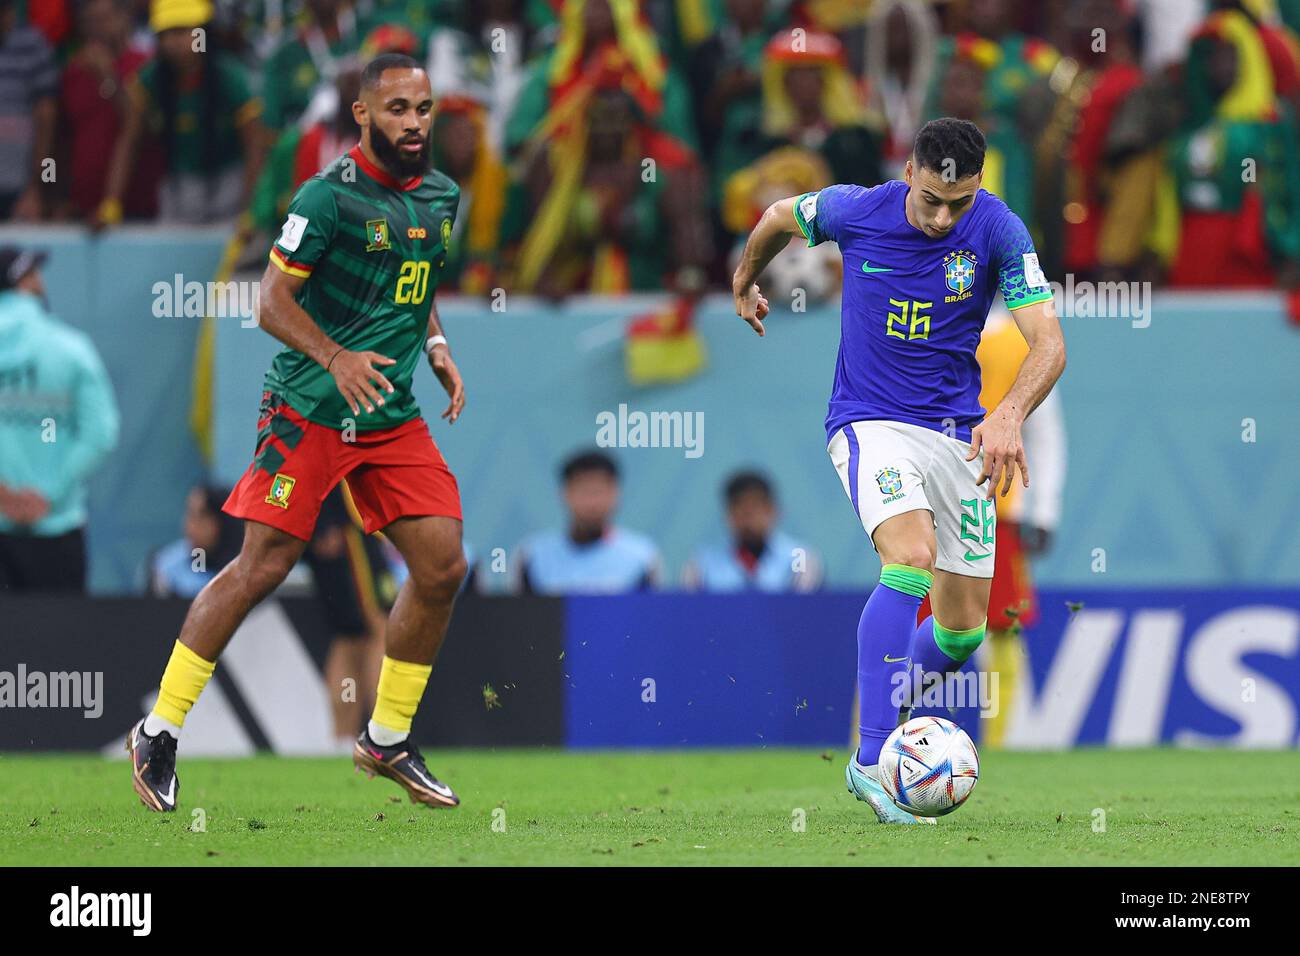 LUSAIL CITY, QATAR - DECEMBER 02: Gabriel Martinelli, Bryan Mbeumo  during the FIFA World Cup Qatar 2022 Group G match between Cameroon and Brazil at Lusail Stadium on December 02, 2022 in Lusail City, Qatar. (Photo by MB Media) Stock Photo